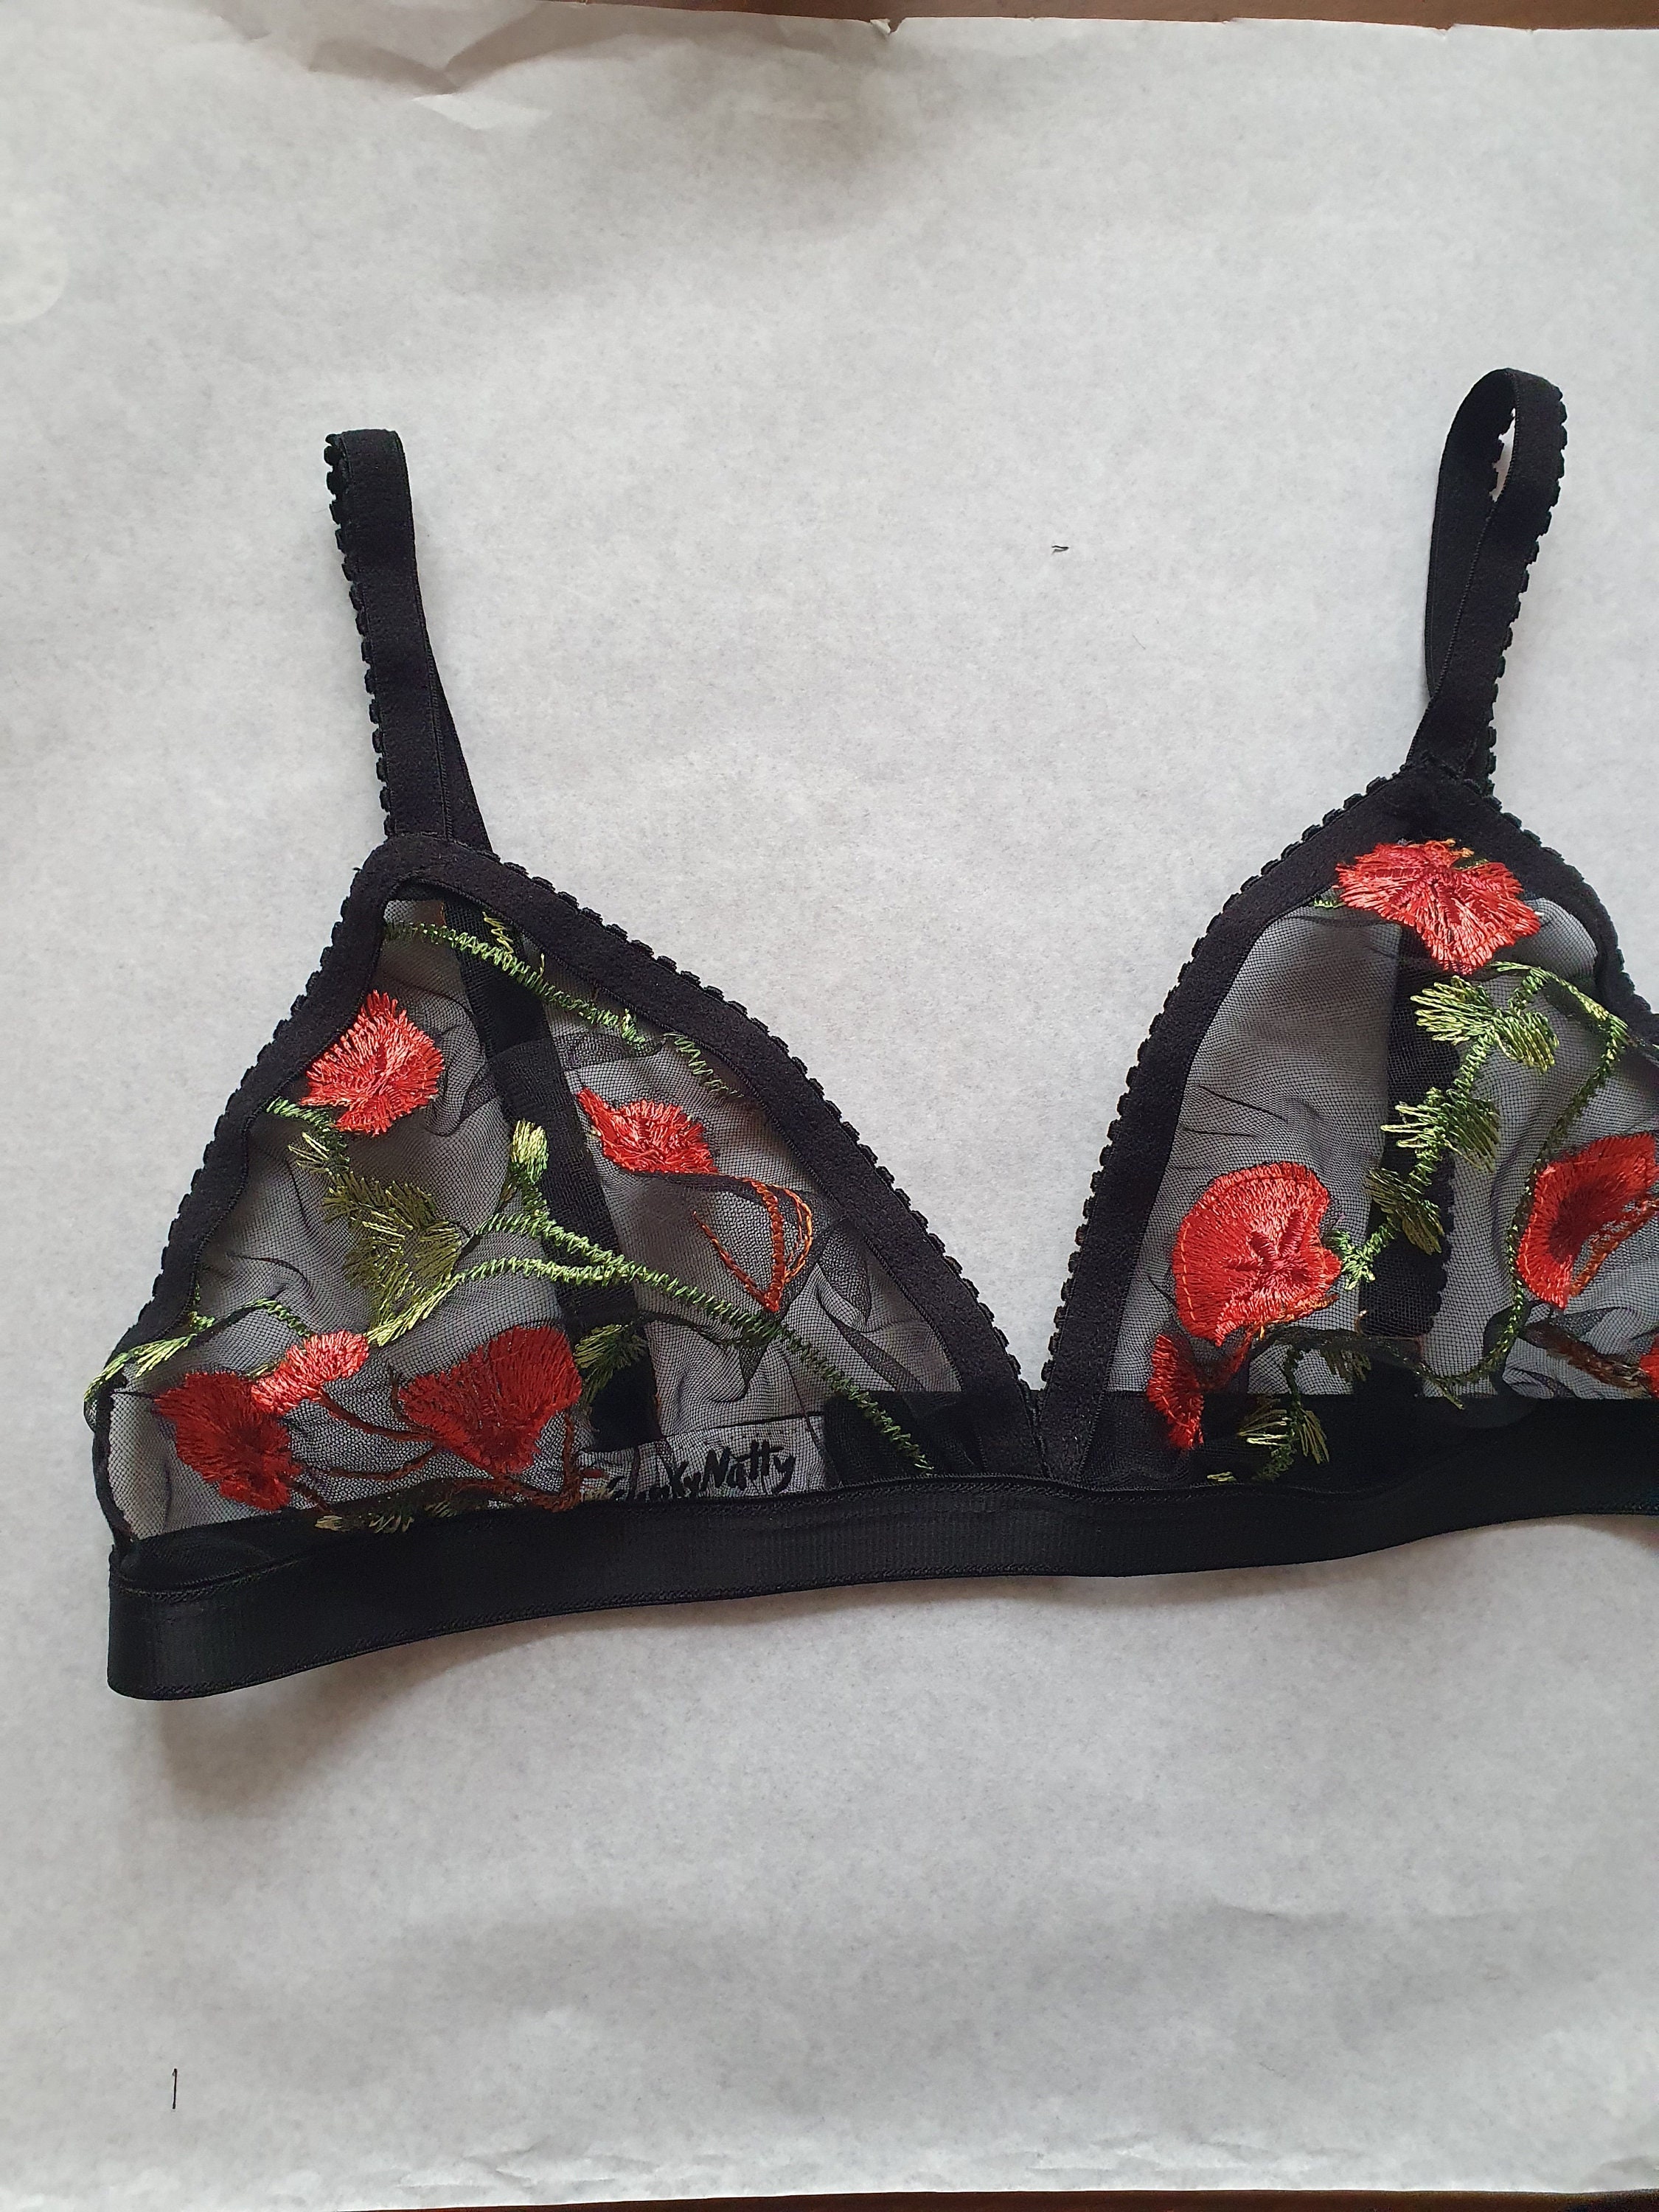 Transparent Mesh Bra, Sheer Lingerie, Floral Bralette, Embroidery Red  Flowers, Botanical See Through, Wireless Bra 